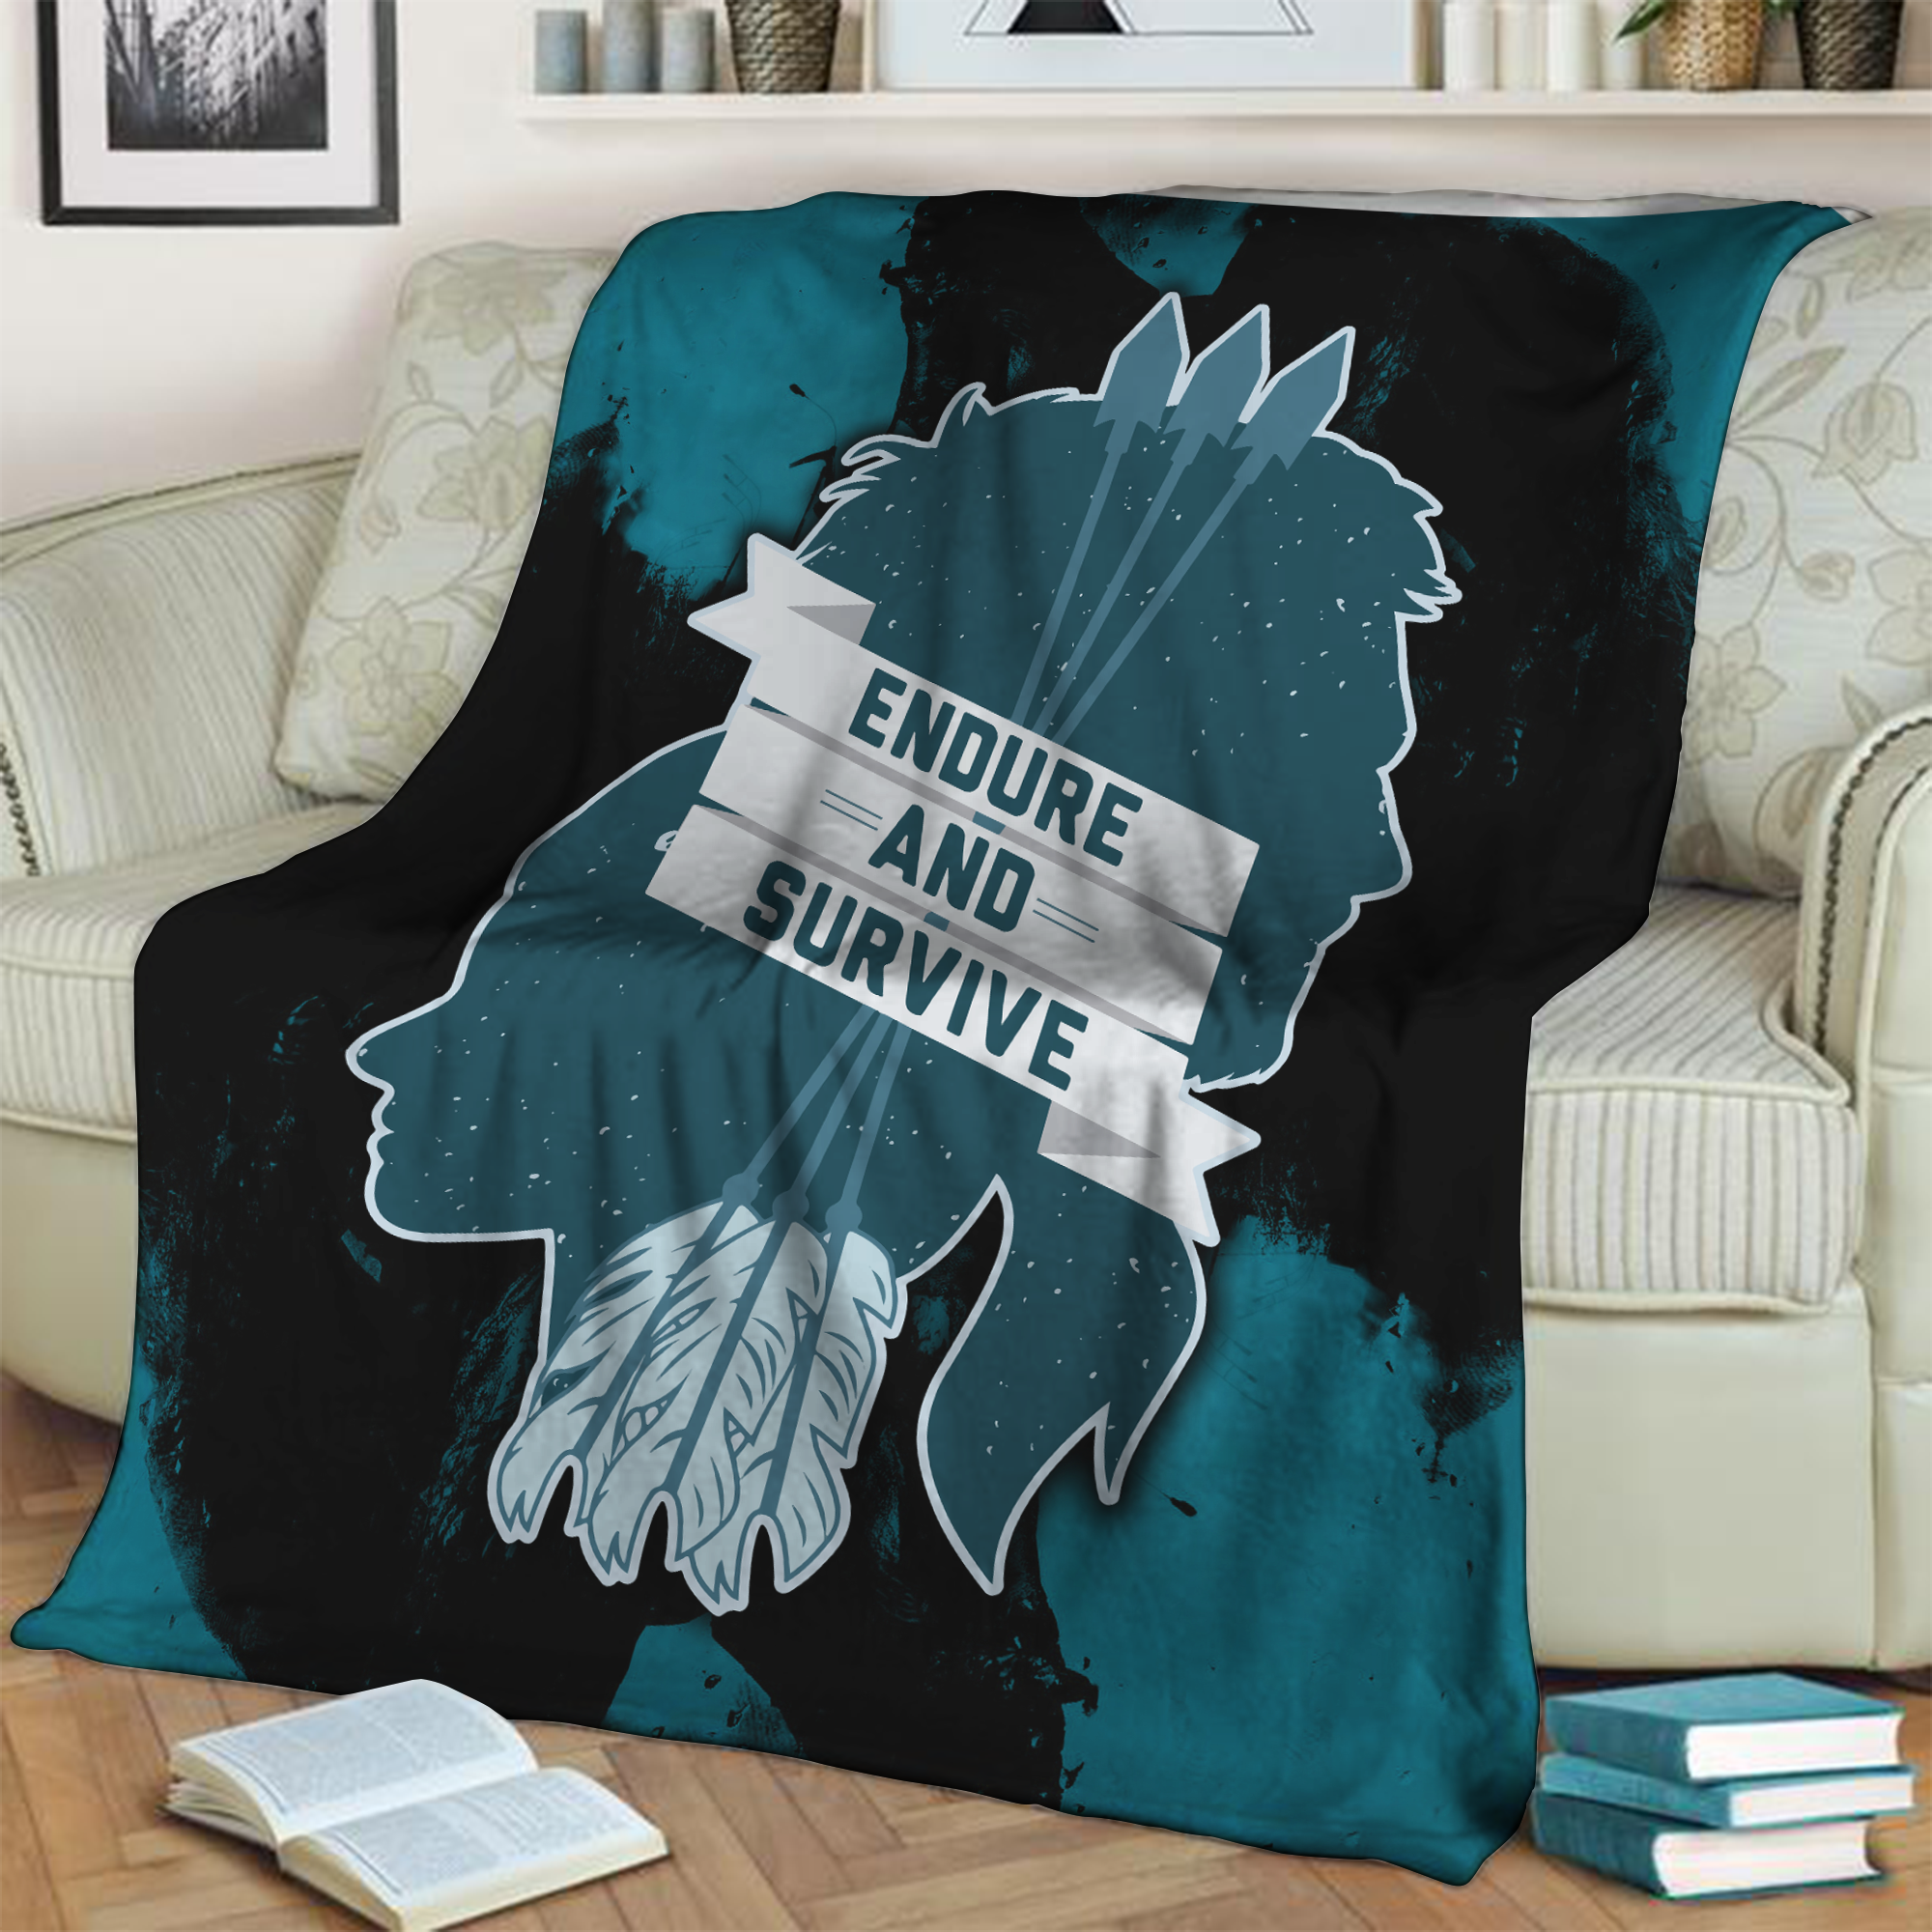 The Last Of Us-  Endure and Survive 3D Throw Blanket 130cm x 150cm  